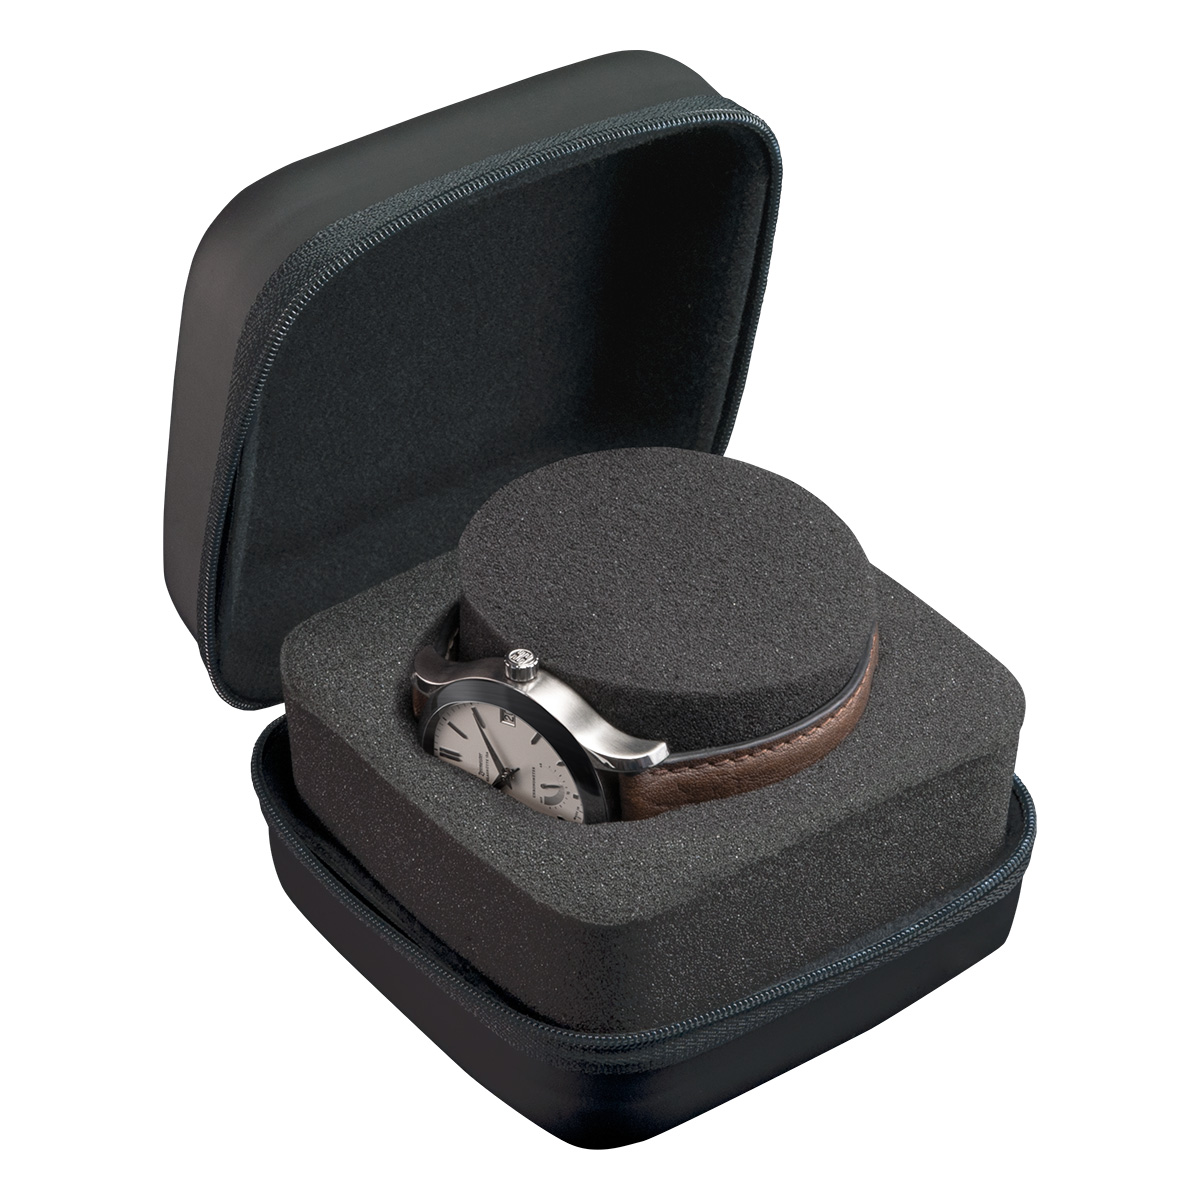 Watch Box ProtectMax, robust hard case for large watches, matt black synthetic material